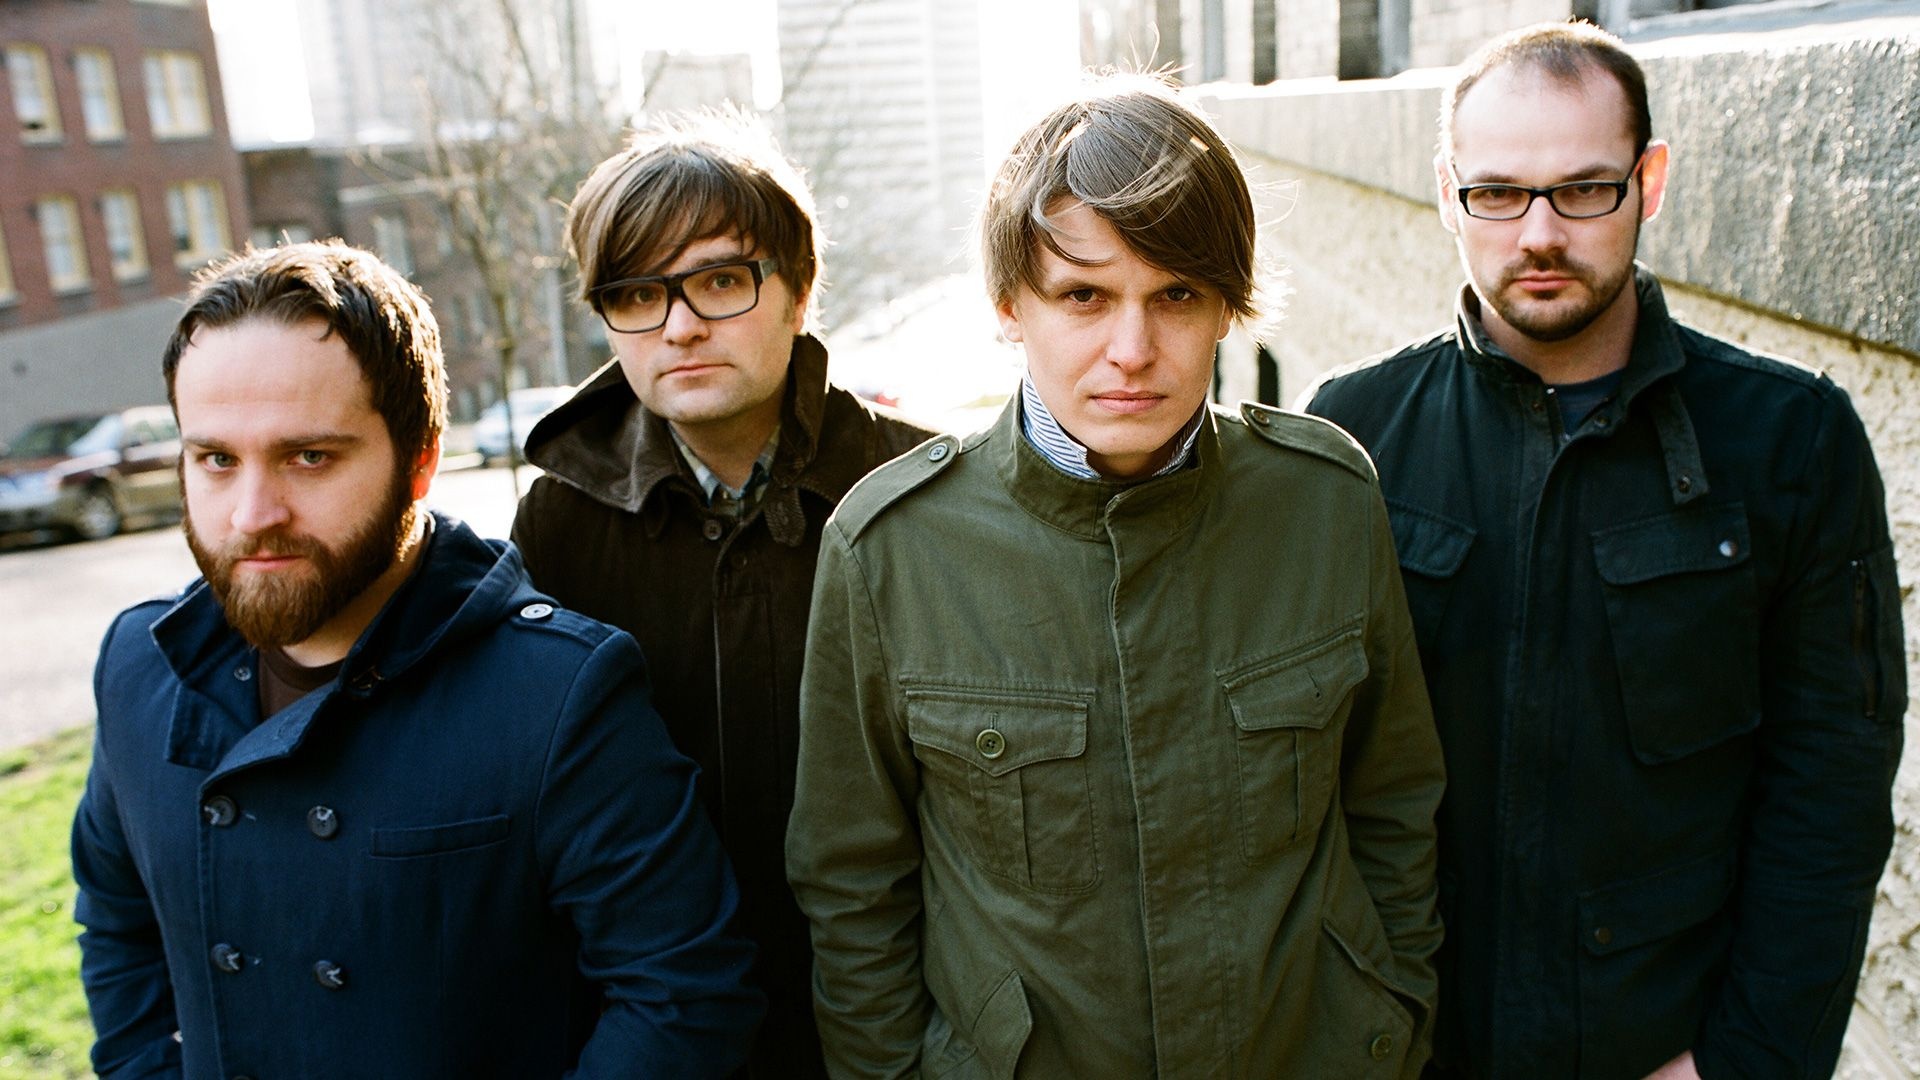 Chris Walla, Death Cab for Cutie, Indie band wallpapers, 1920x1080 Full HD Desktop